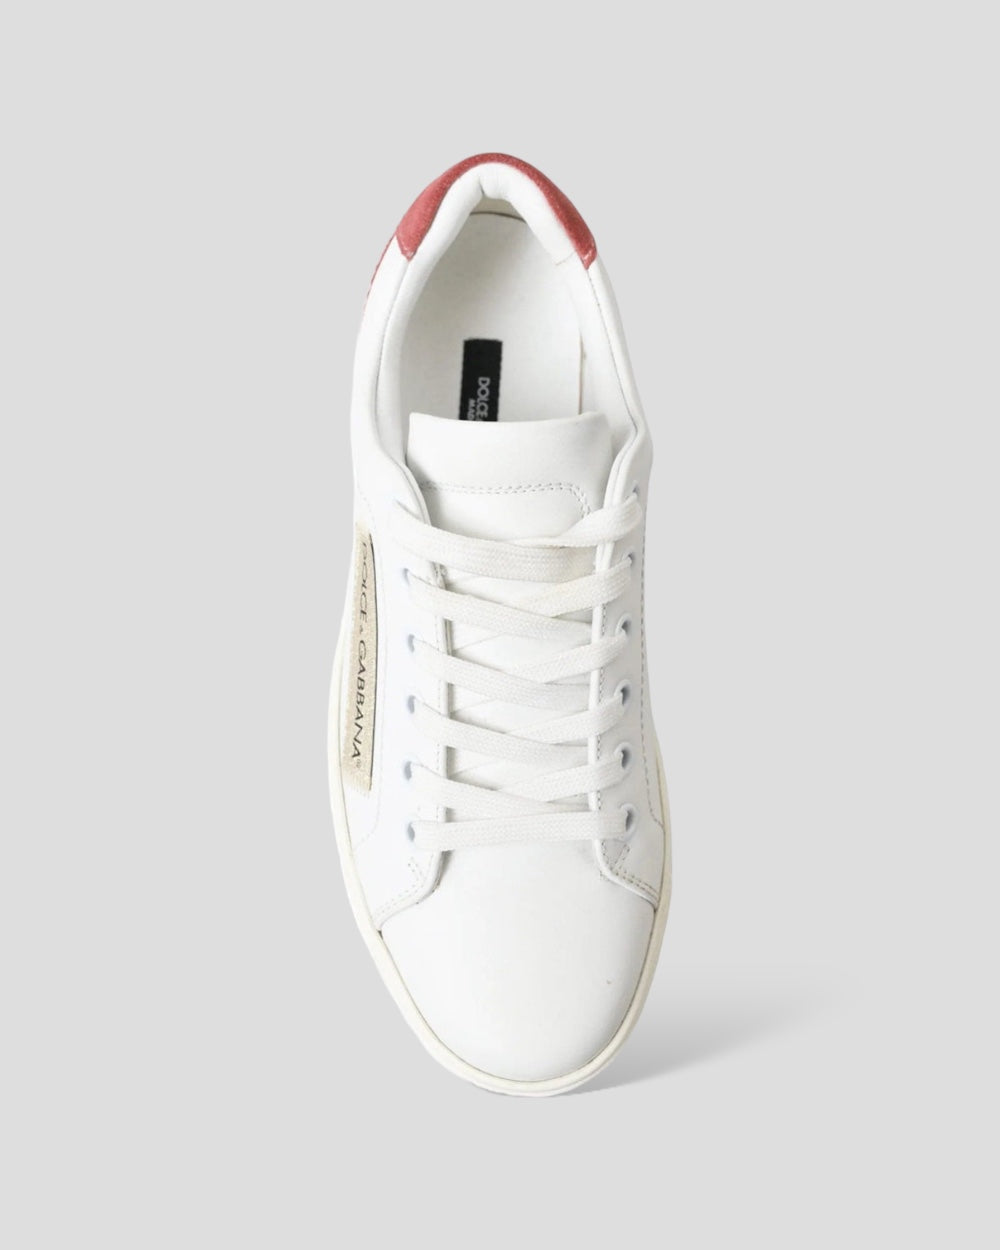 Dolce & Gabbana White Pink Leather Low Top Sneakers Shoes